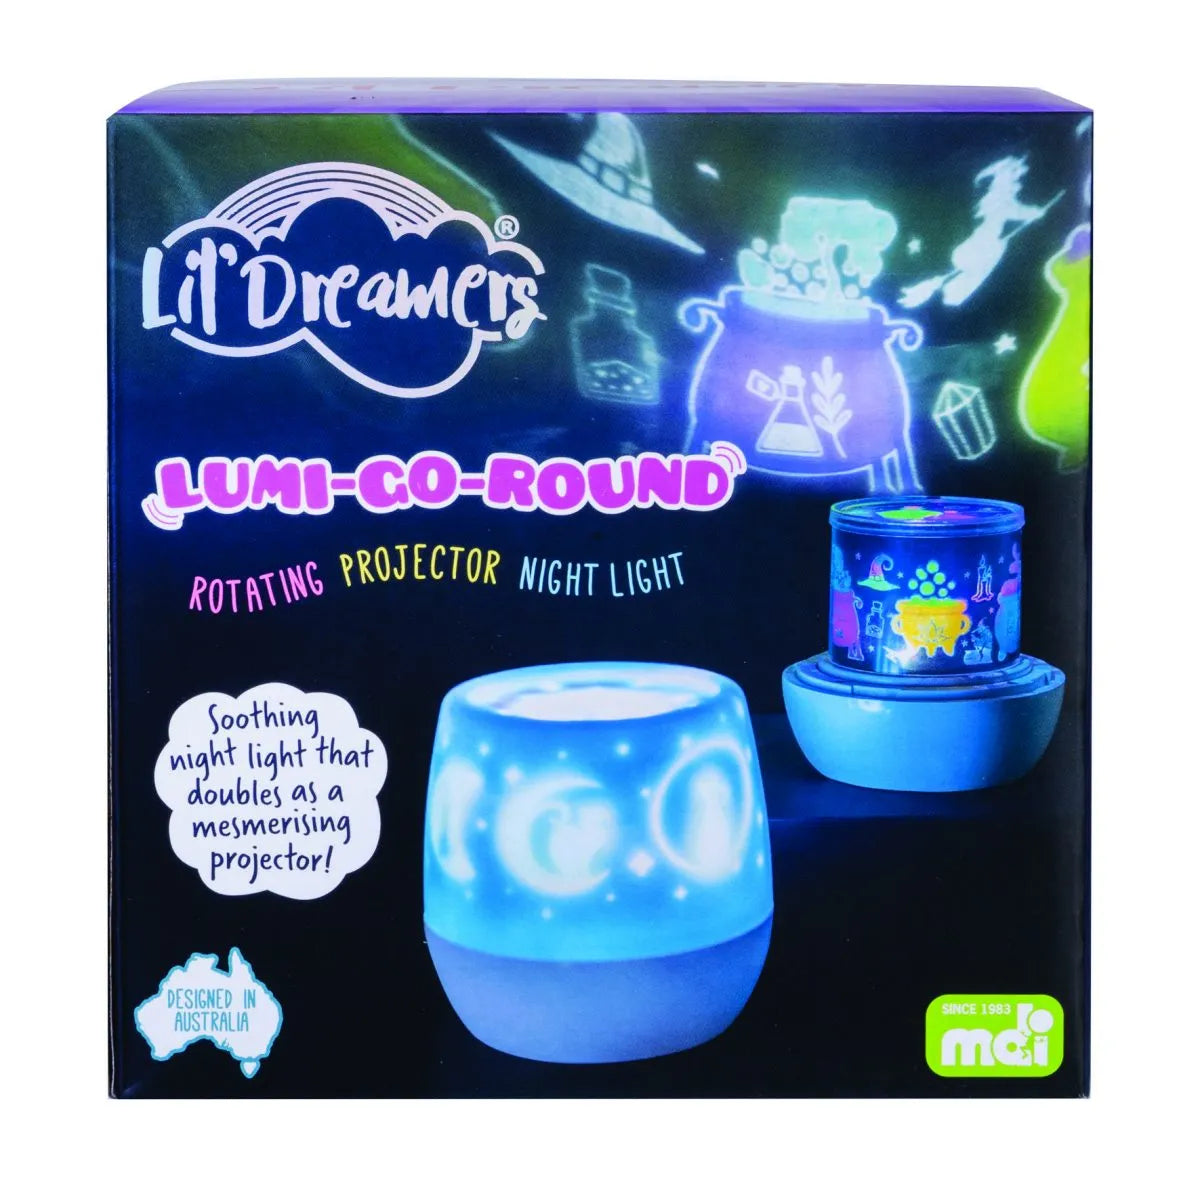 Lil Dreamers Lumi-Go-Round Enchanted  Rotating Projector Light